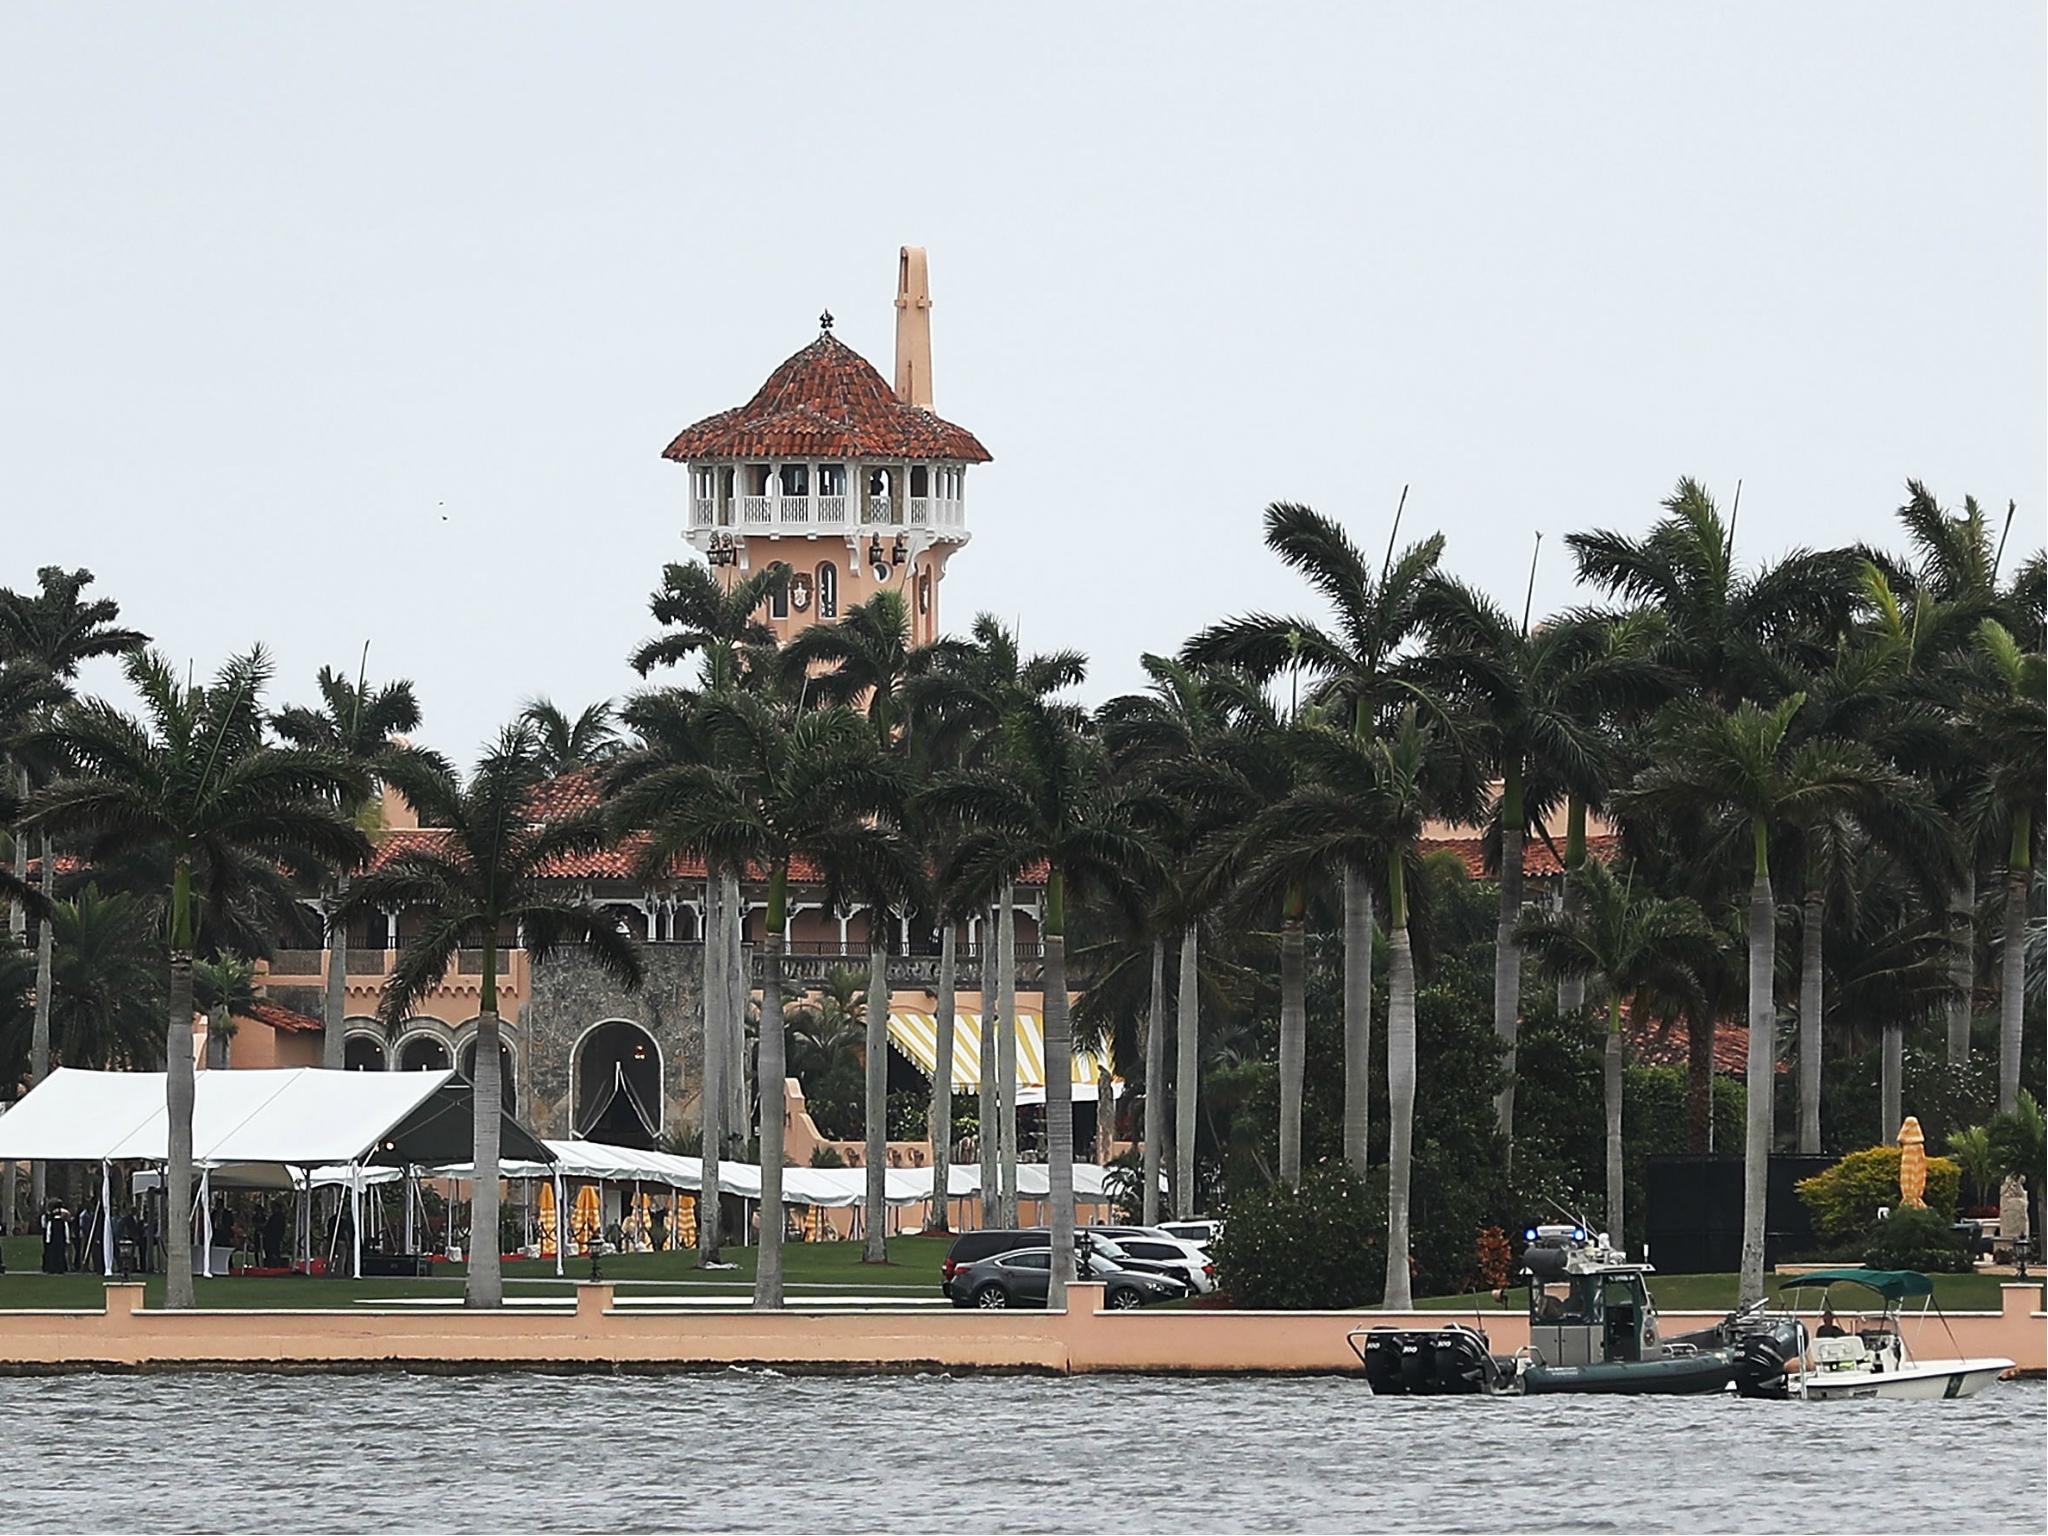 Mar-a-Lago has applied for 70 seasonal, foreign worker visas during the White House's 'Made in America' week